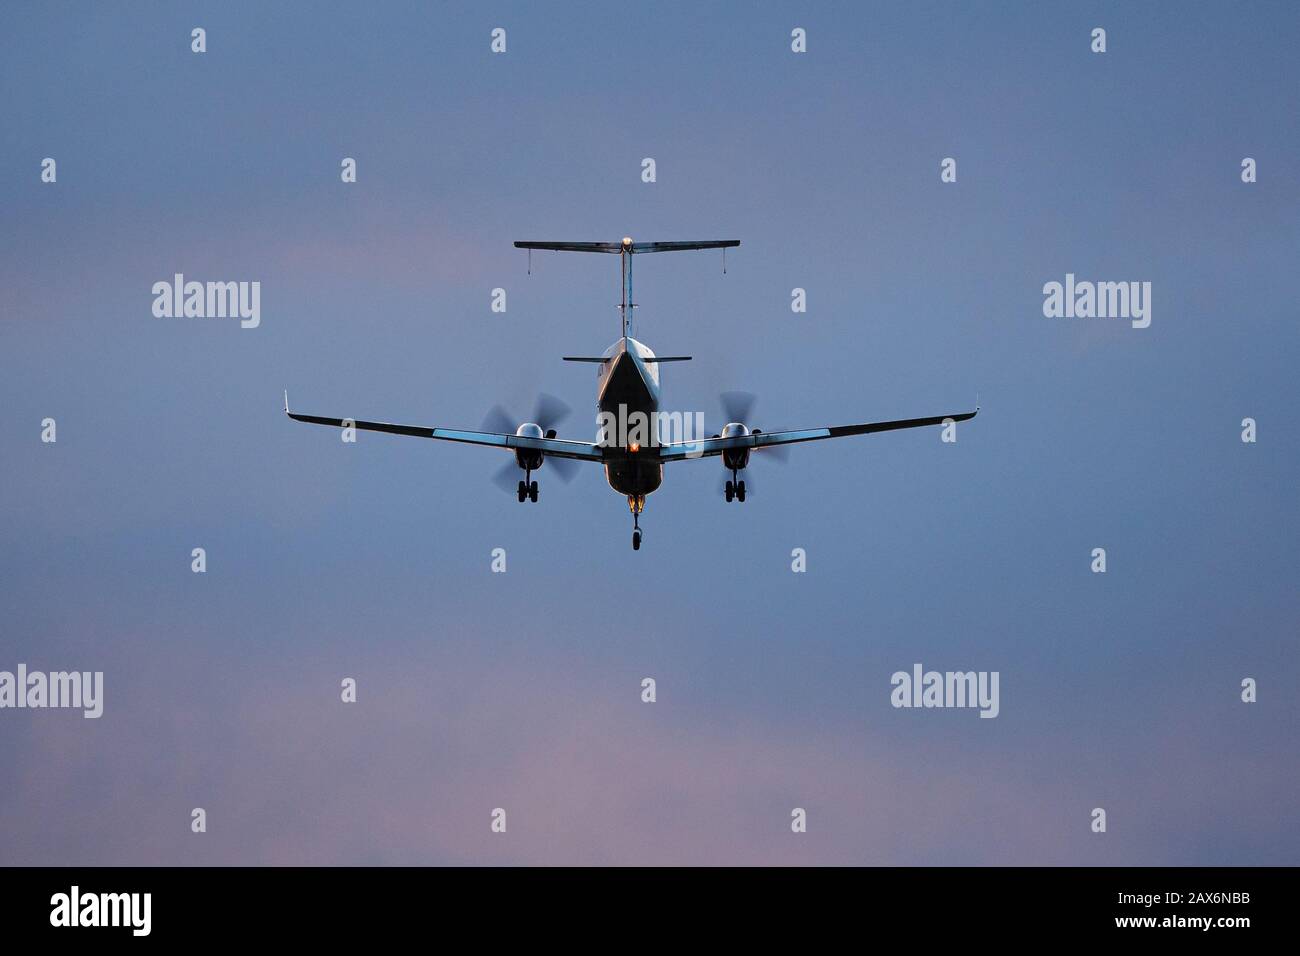 Richmond, British Columbia, Canada. 9th Feb, 2020. A Beech 1900D twin-engine turbo-prop regional airliner on final approach for landing at Vancouver International Airport. Credit: Bayne Stanley/ZUMA Wire/Alamy Live News Stock Photo